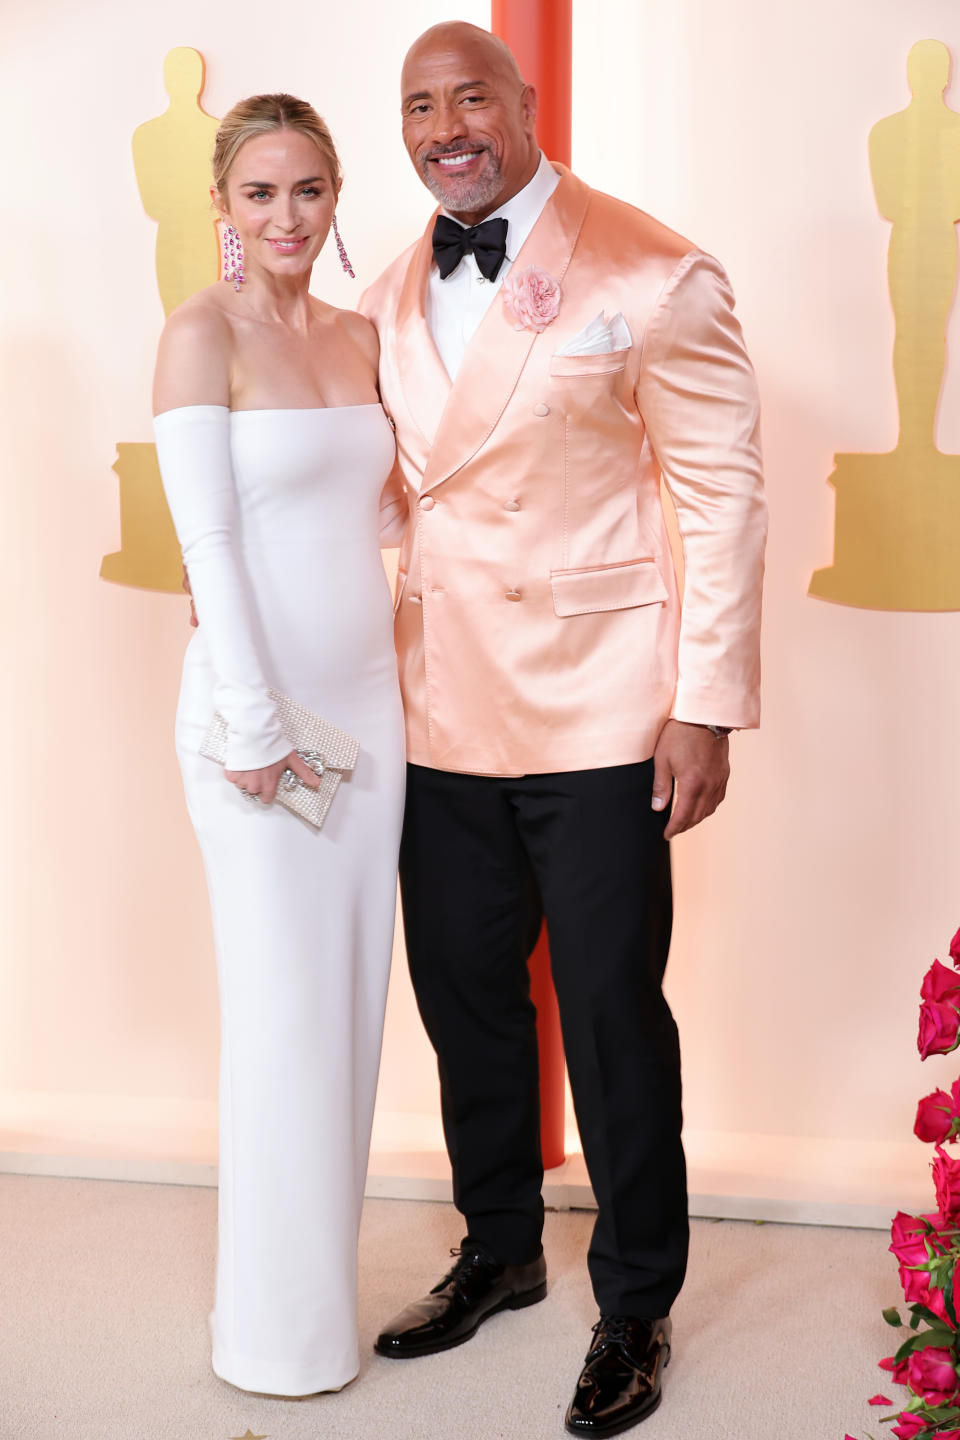 Emily Blunt and Dwayne &#x00201c;the Rock&#x00201d; Johnson at the 95th Academy Awards.